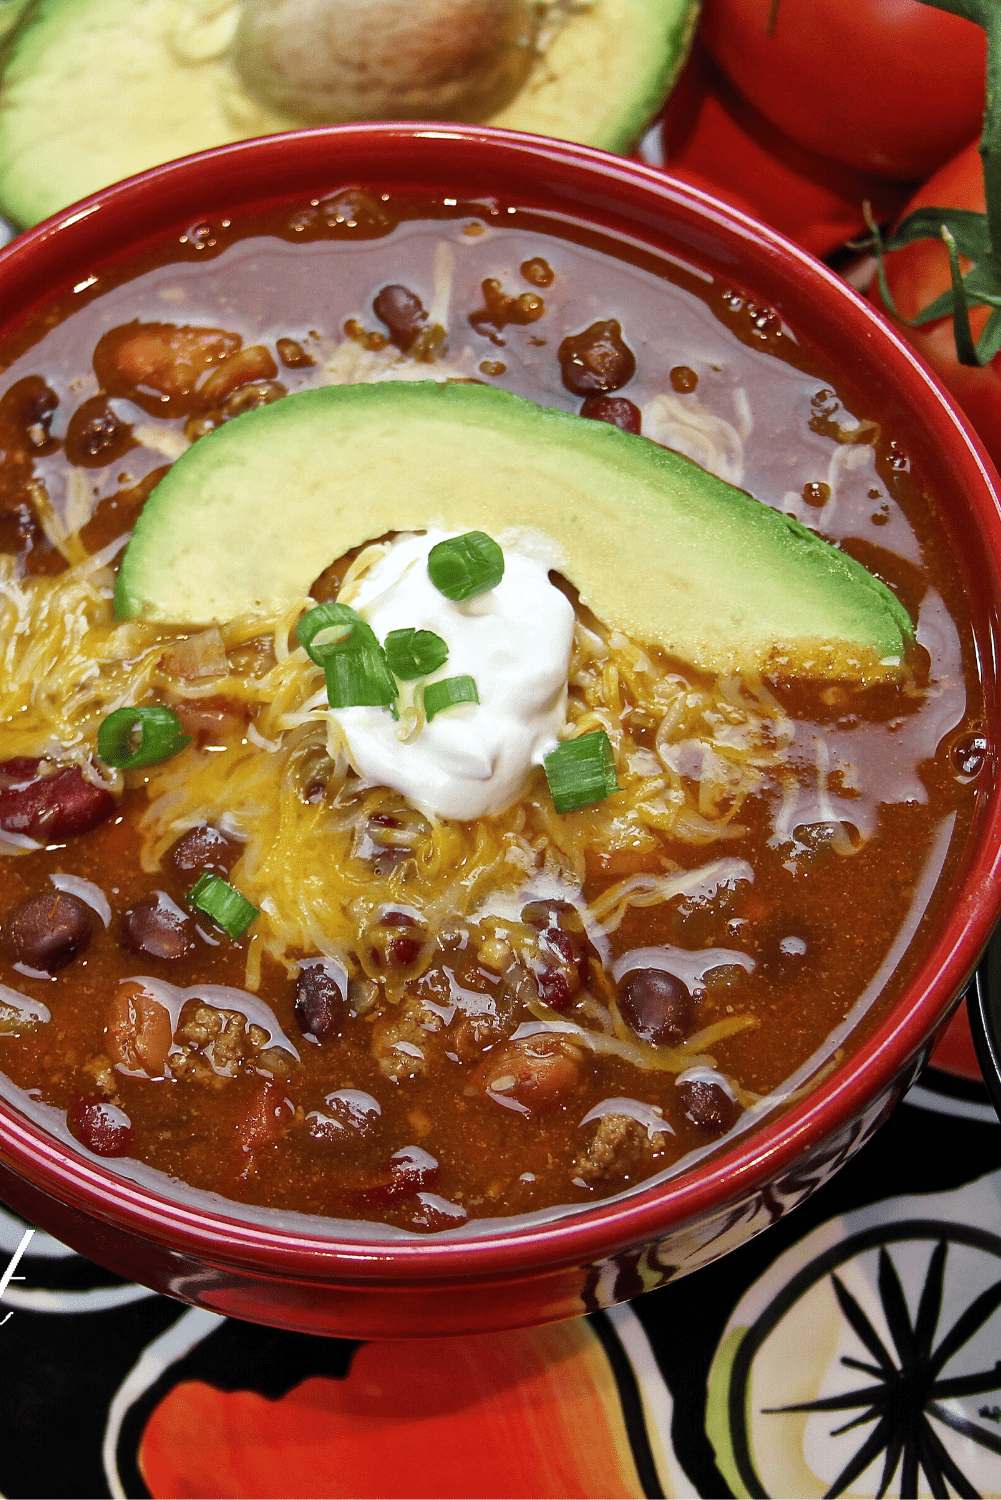 How to make simple and quick chili